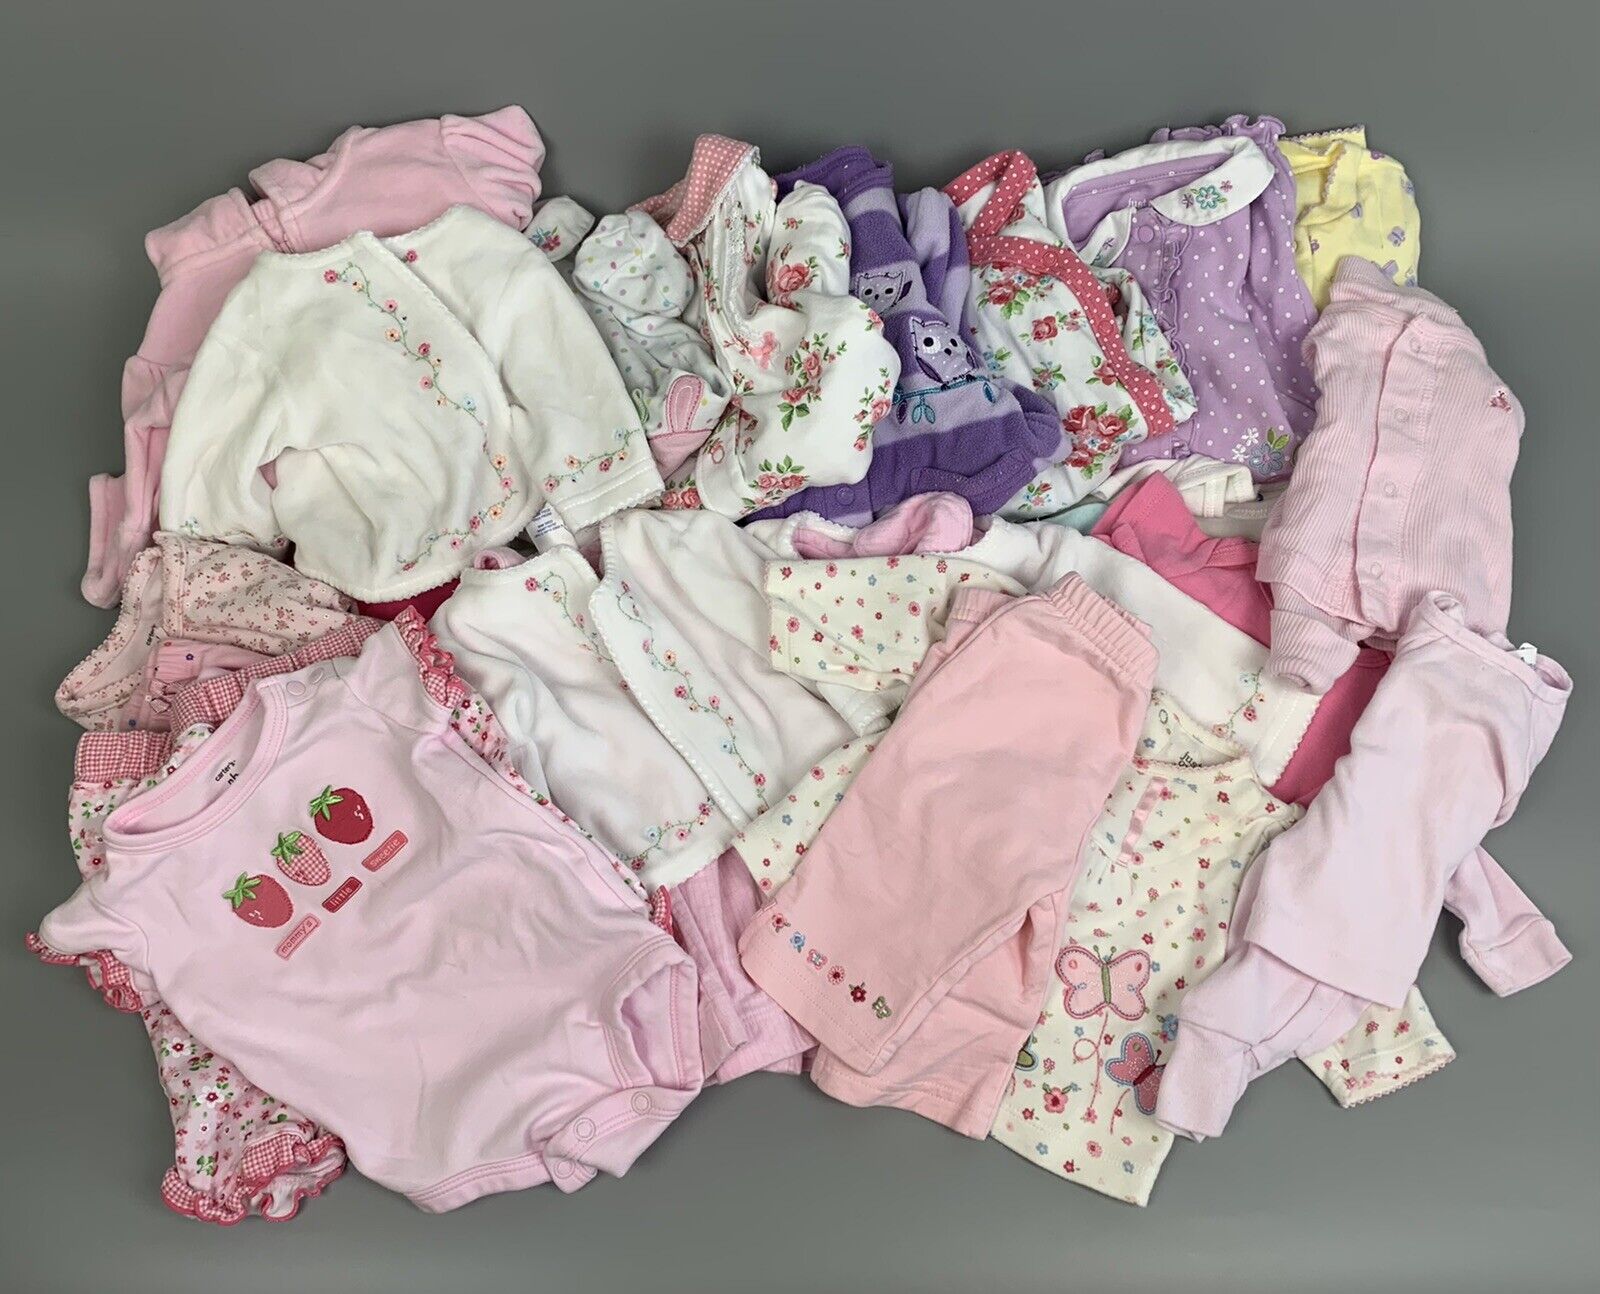 NEWBORN BABY GIRL Clothes LOT OF 31 Pieces Carters Child Of Mine Gerber And More Child of Mine by Carter's